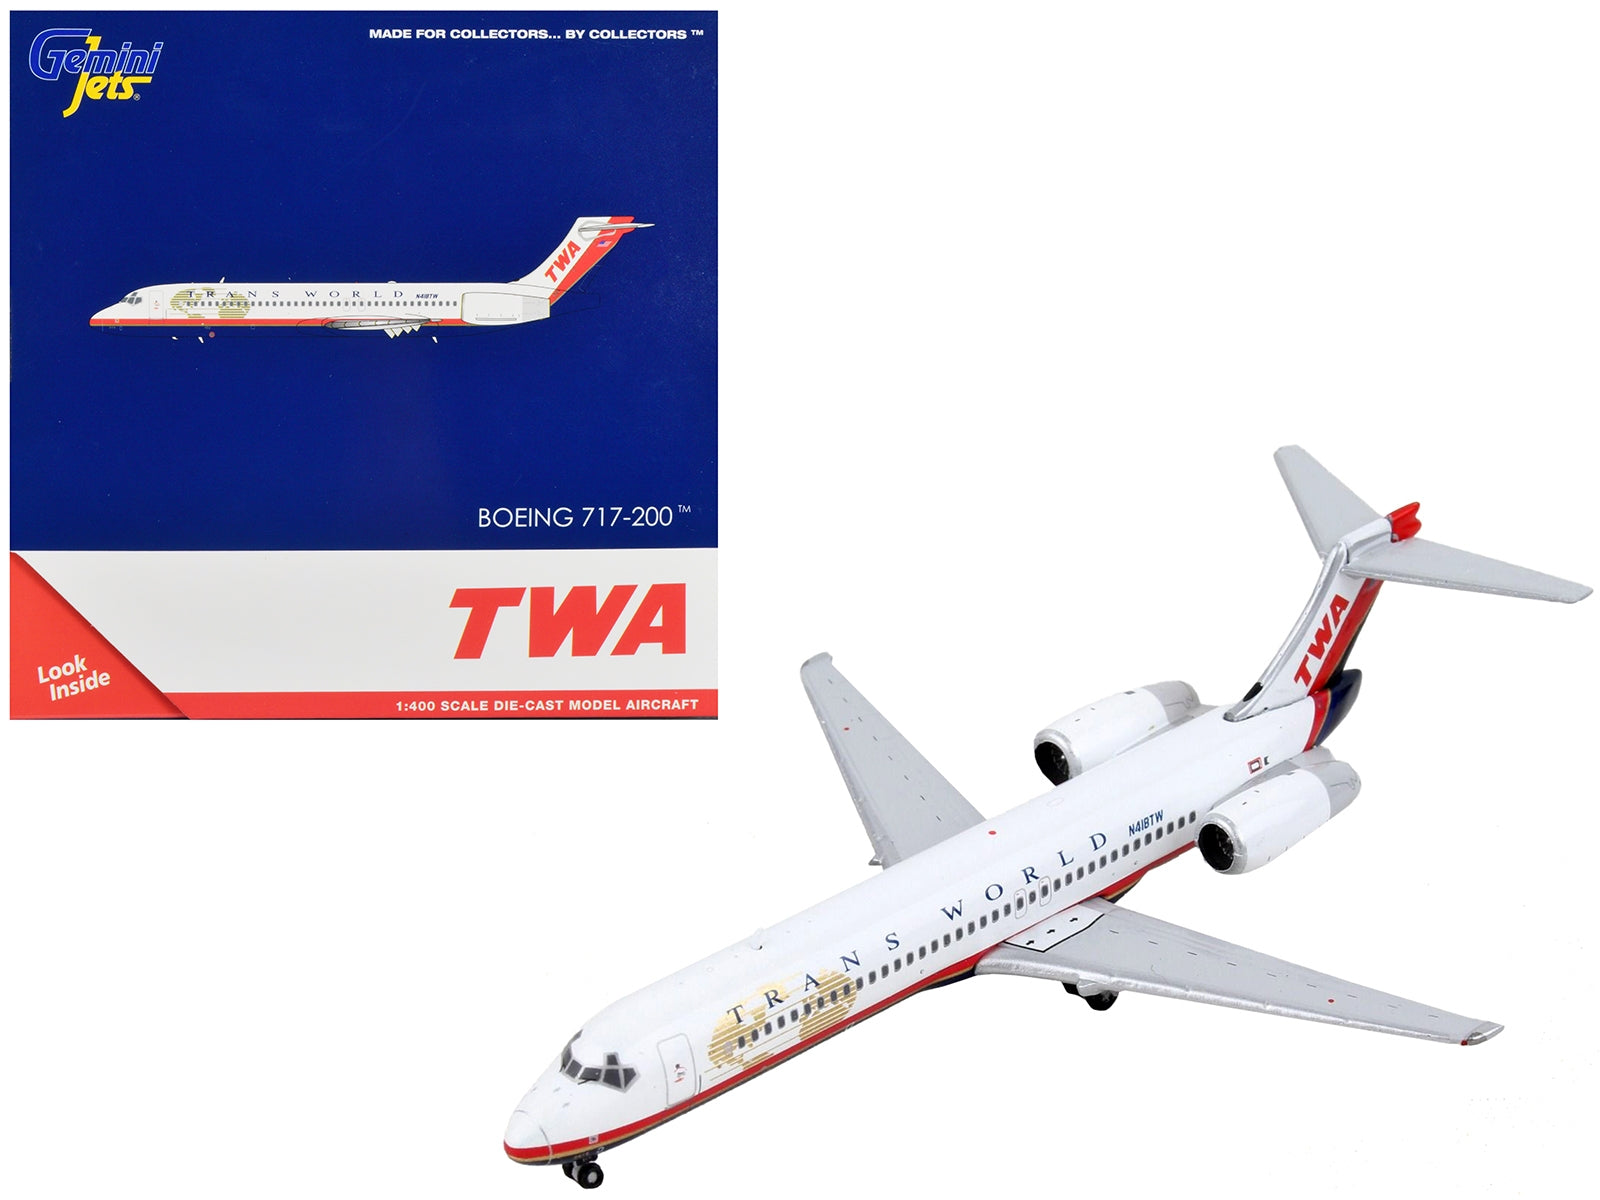 Boeing 717-200 Commercial Aircraft "Trans World Airlines" White with Red Stripes 1/400 Diecast Model Airplane by GeminiJets